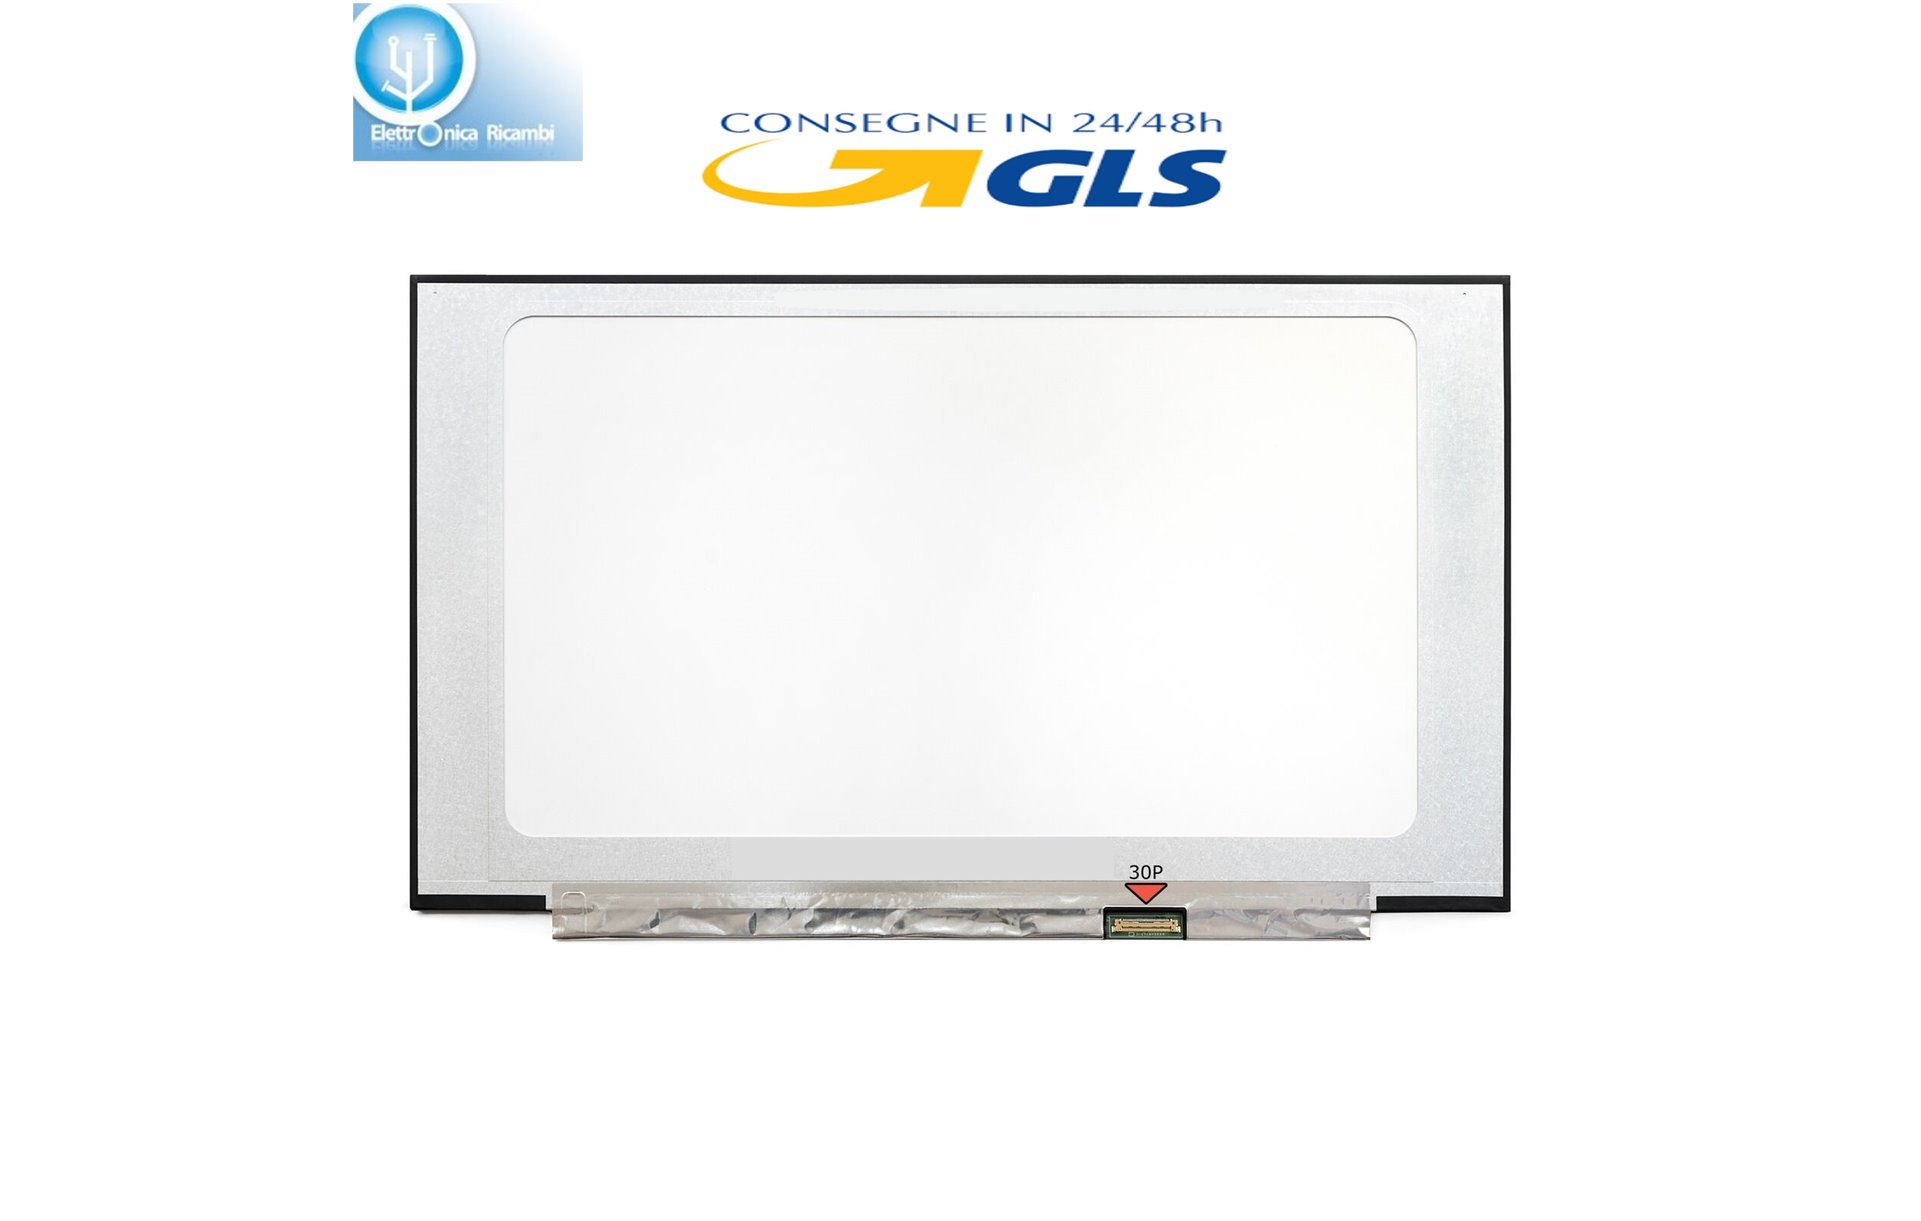 DISPLAY LCD Dell INSPIRON P112F006 SERIES 15.6 WideScreen (13.6"x7.6")  LED 30 pin IPS